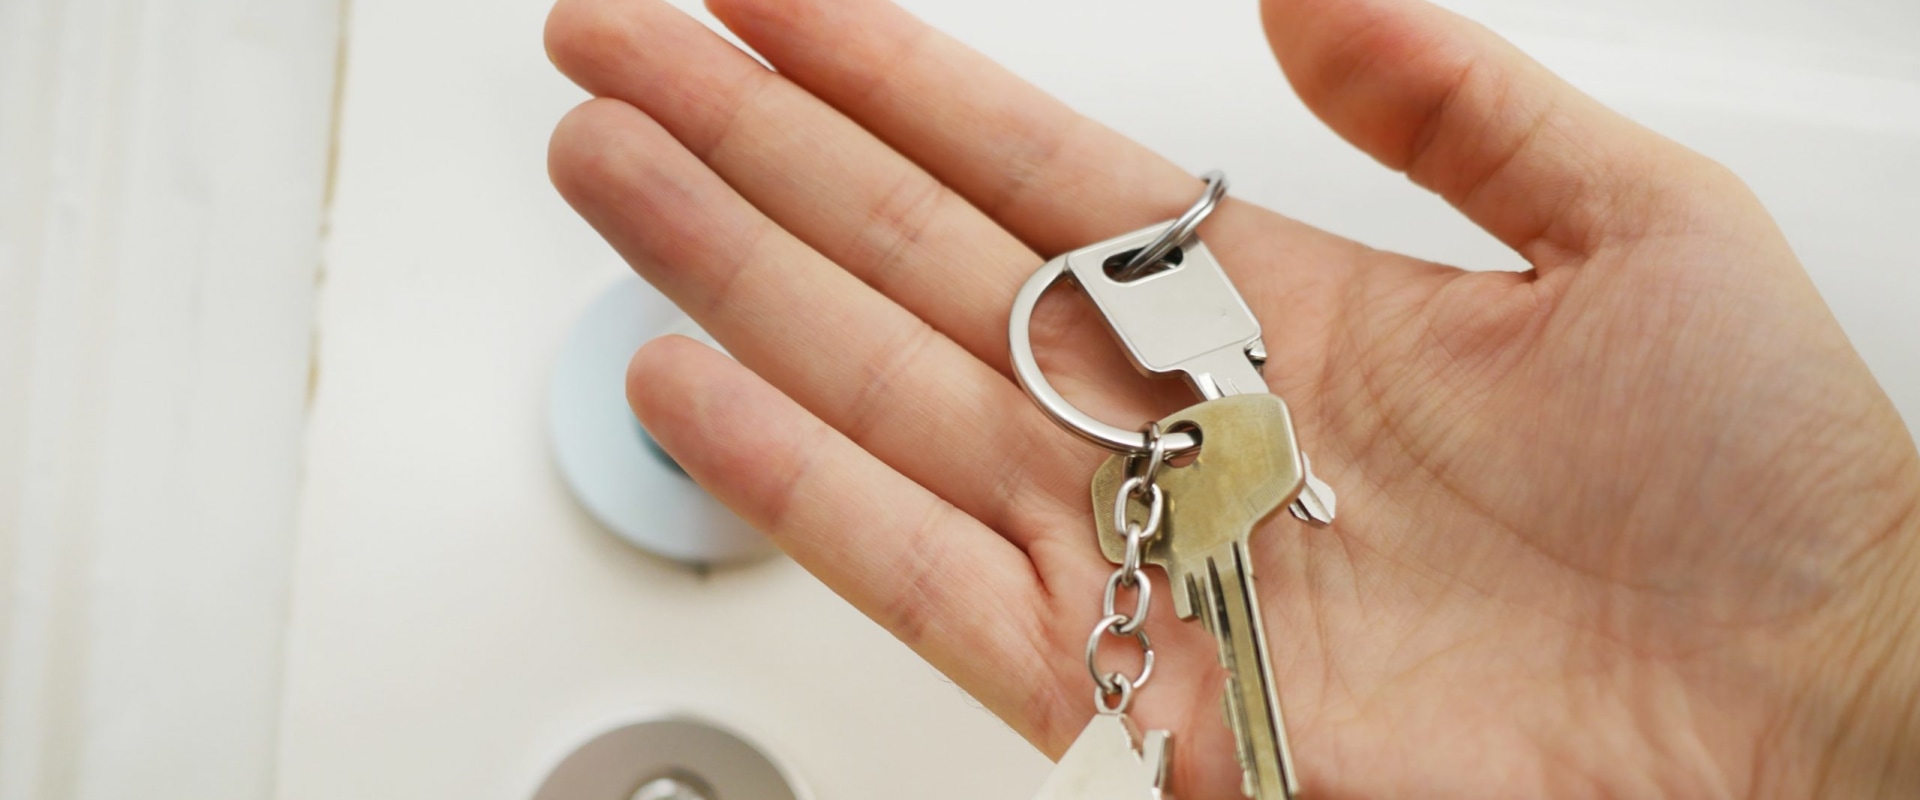 What is the Difference Between Consumer Buy-to-Let and Regulated Buy-to-Let Mortgages?